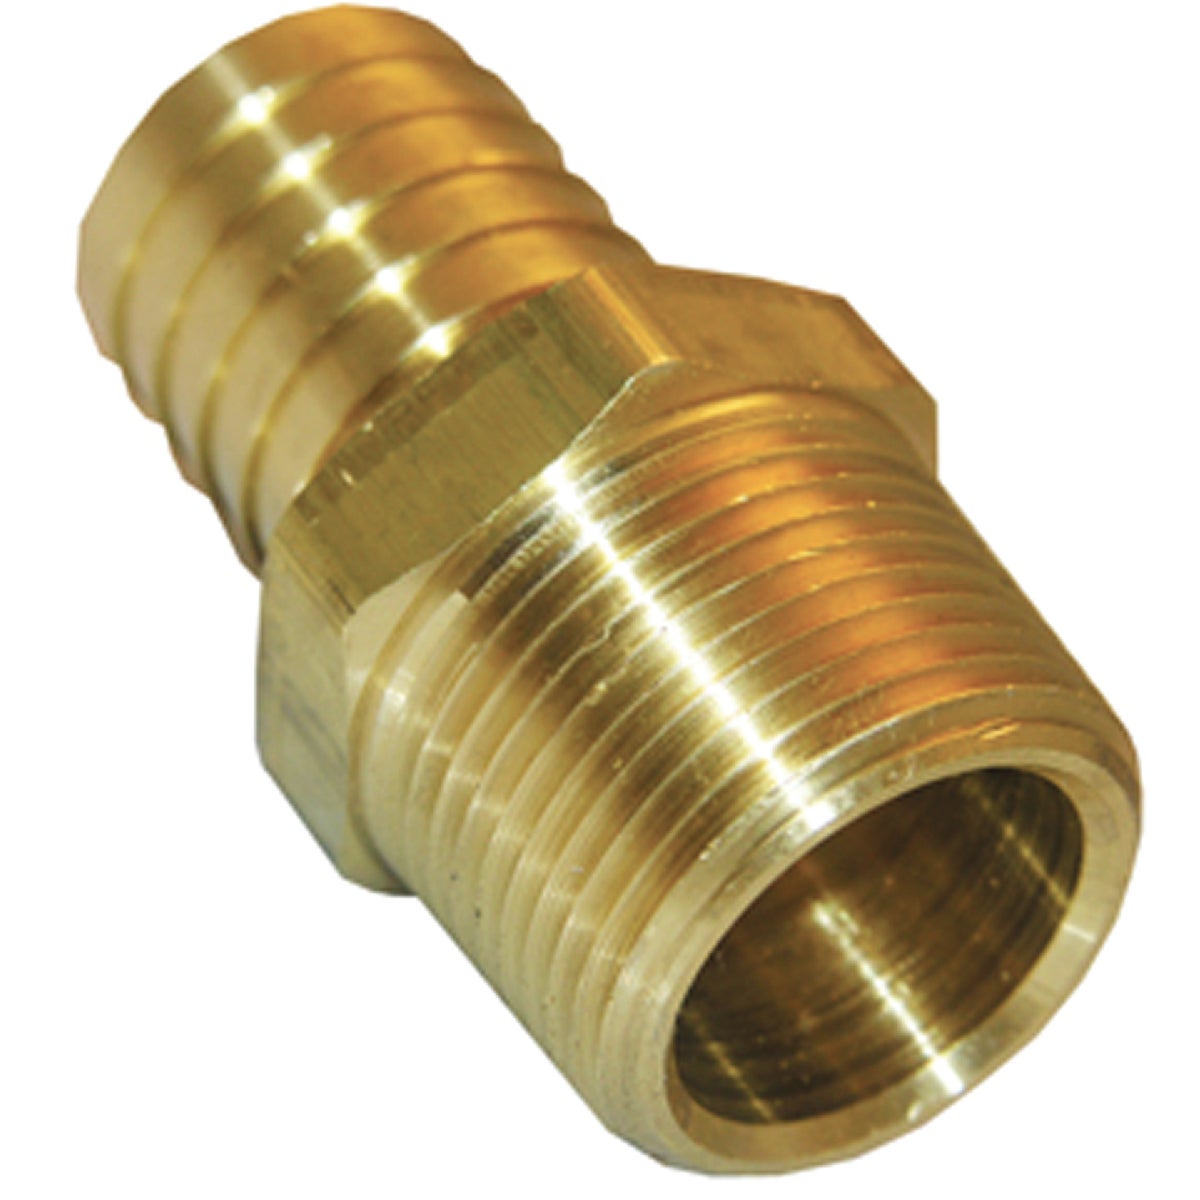 Lasco 1/2 In. MPT x 1/2 In. Brass Hose Barb Adapter